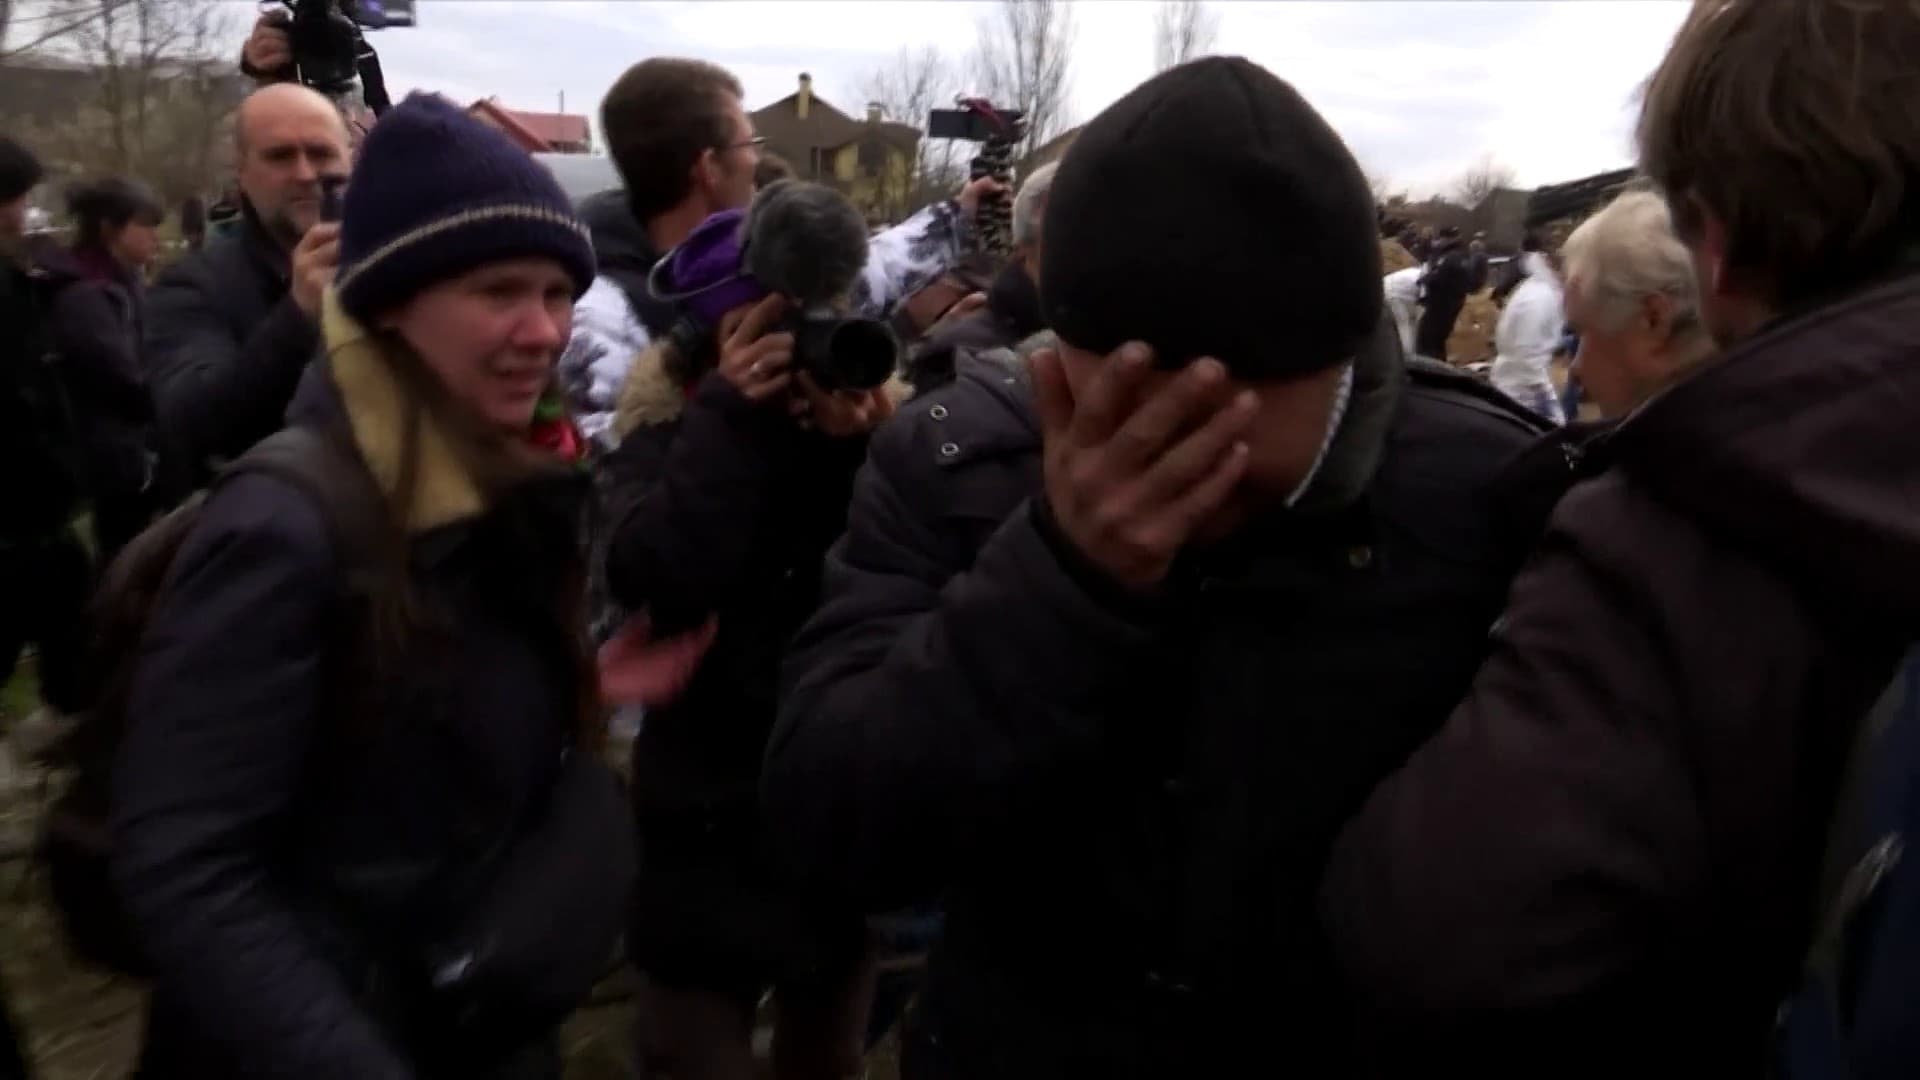 in tears, a Ukrainian recognizes his brother’s body among the victims